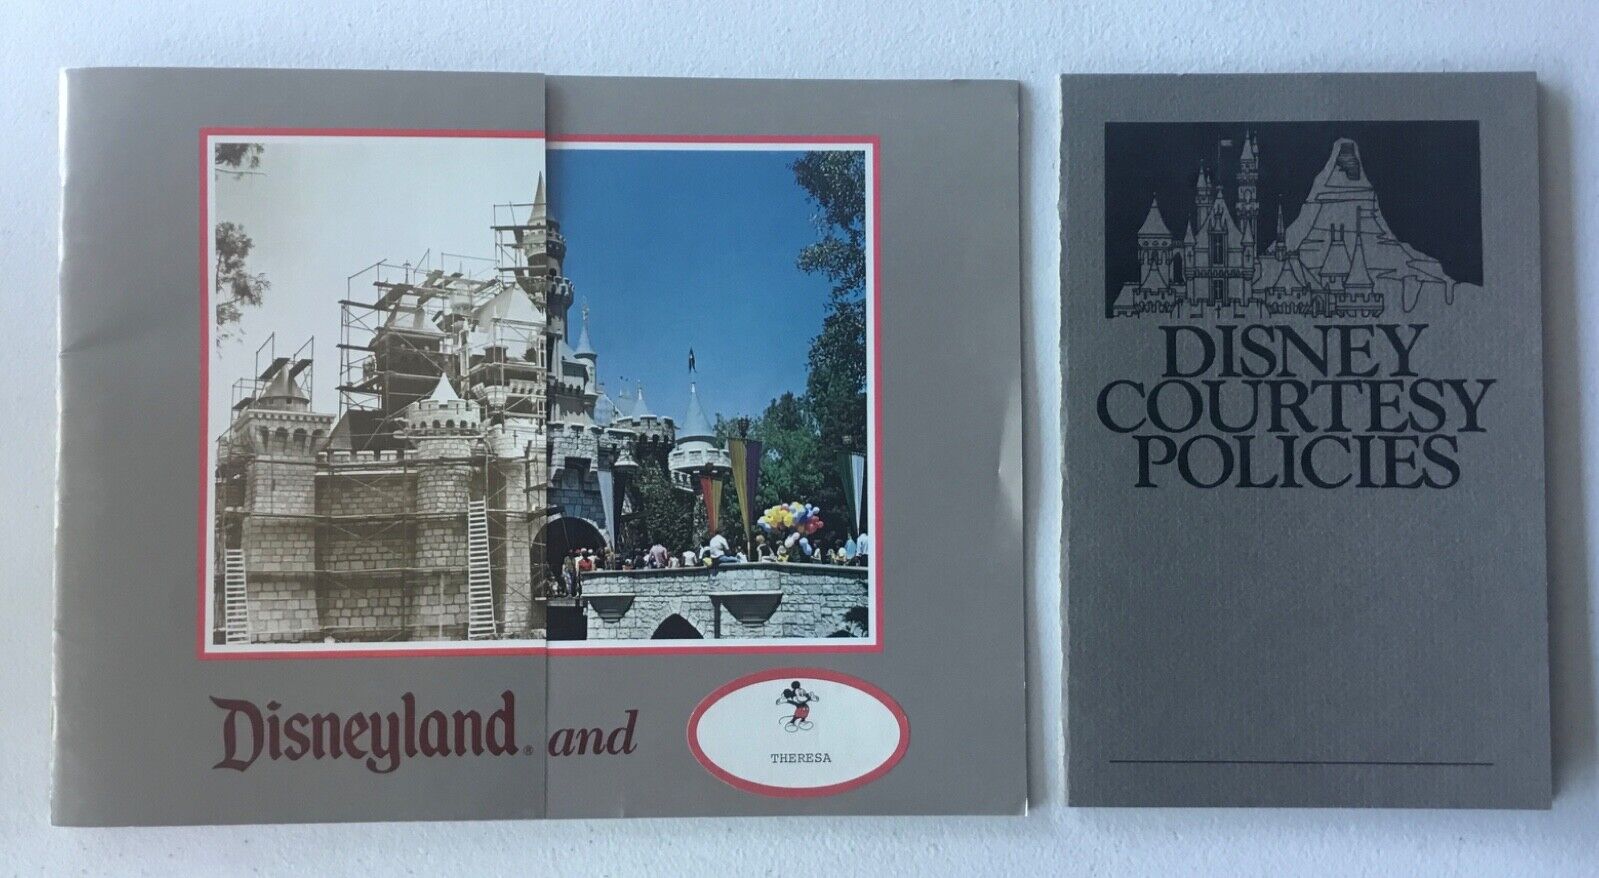 1988 Welcome to Disneyland New Cast Member Orientation Guide & Courtesy Policies